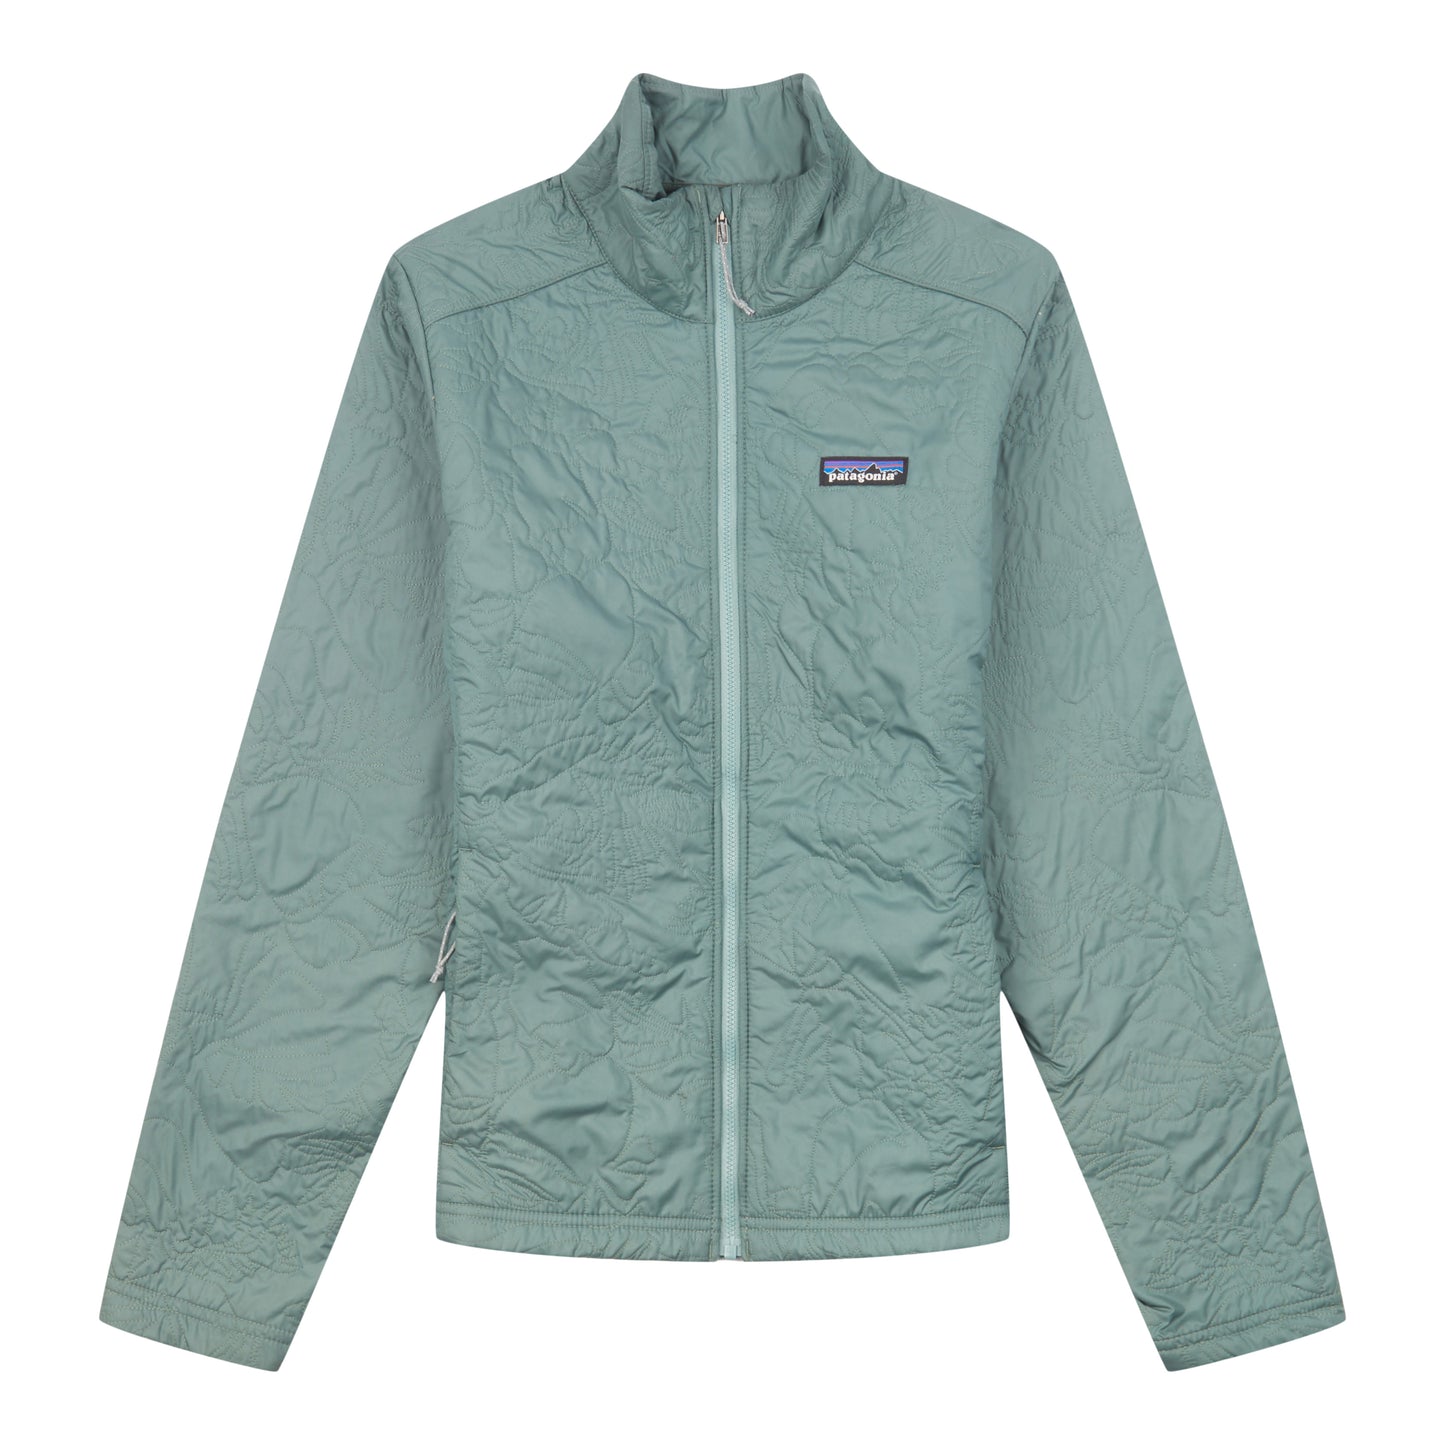 W's Orchid Cove Jacket